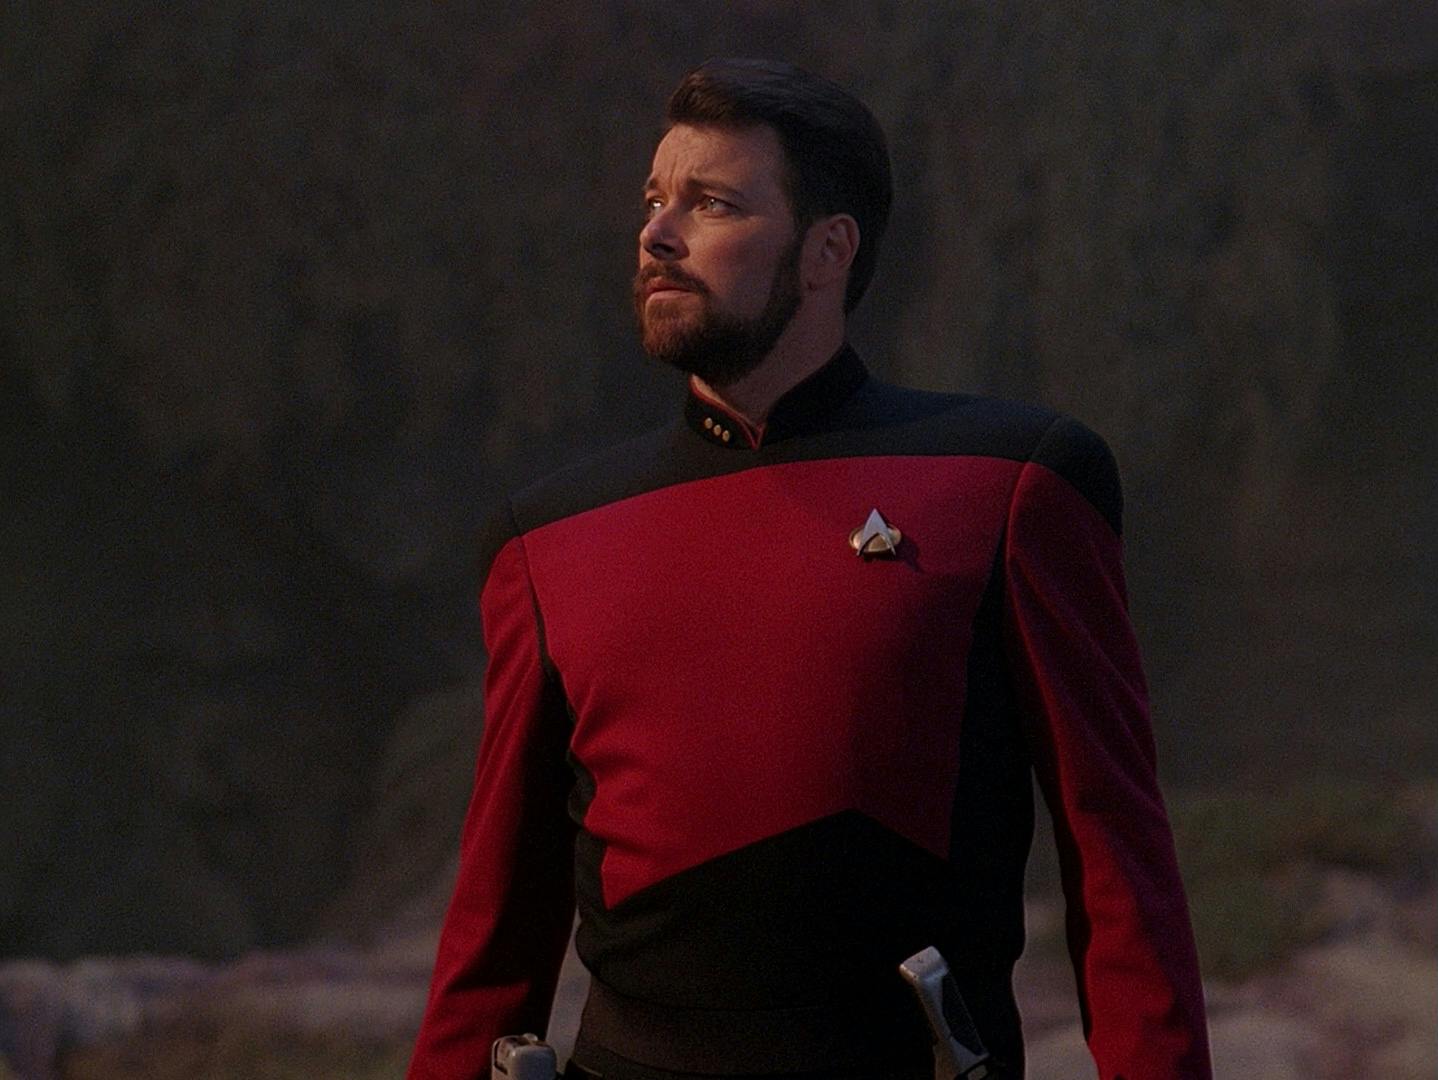 On the surface of a planet, Riker stands and looks out towards the horizon in 'The Best of Both Worlds, Part I'